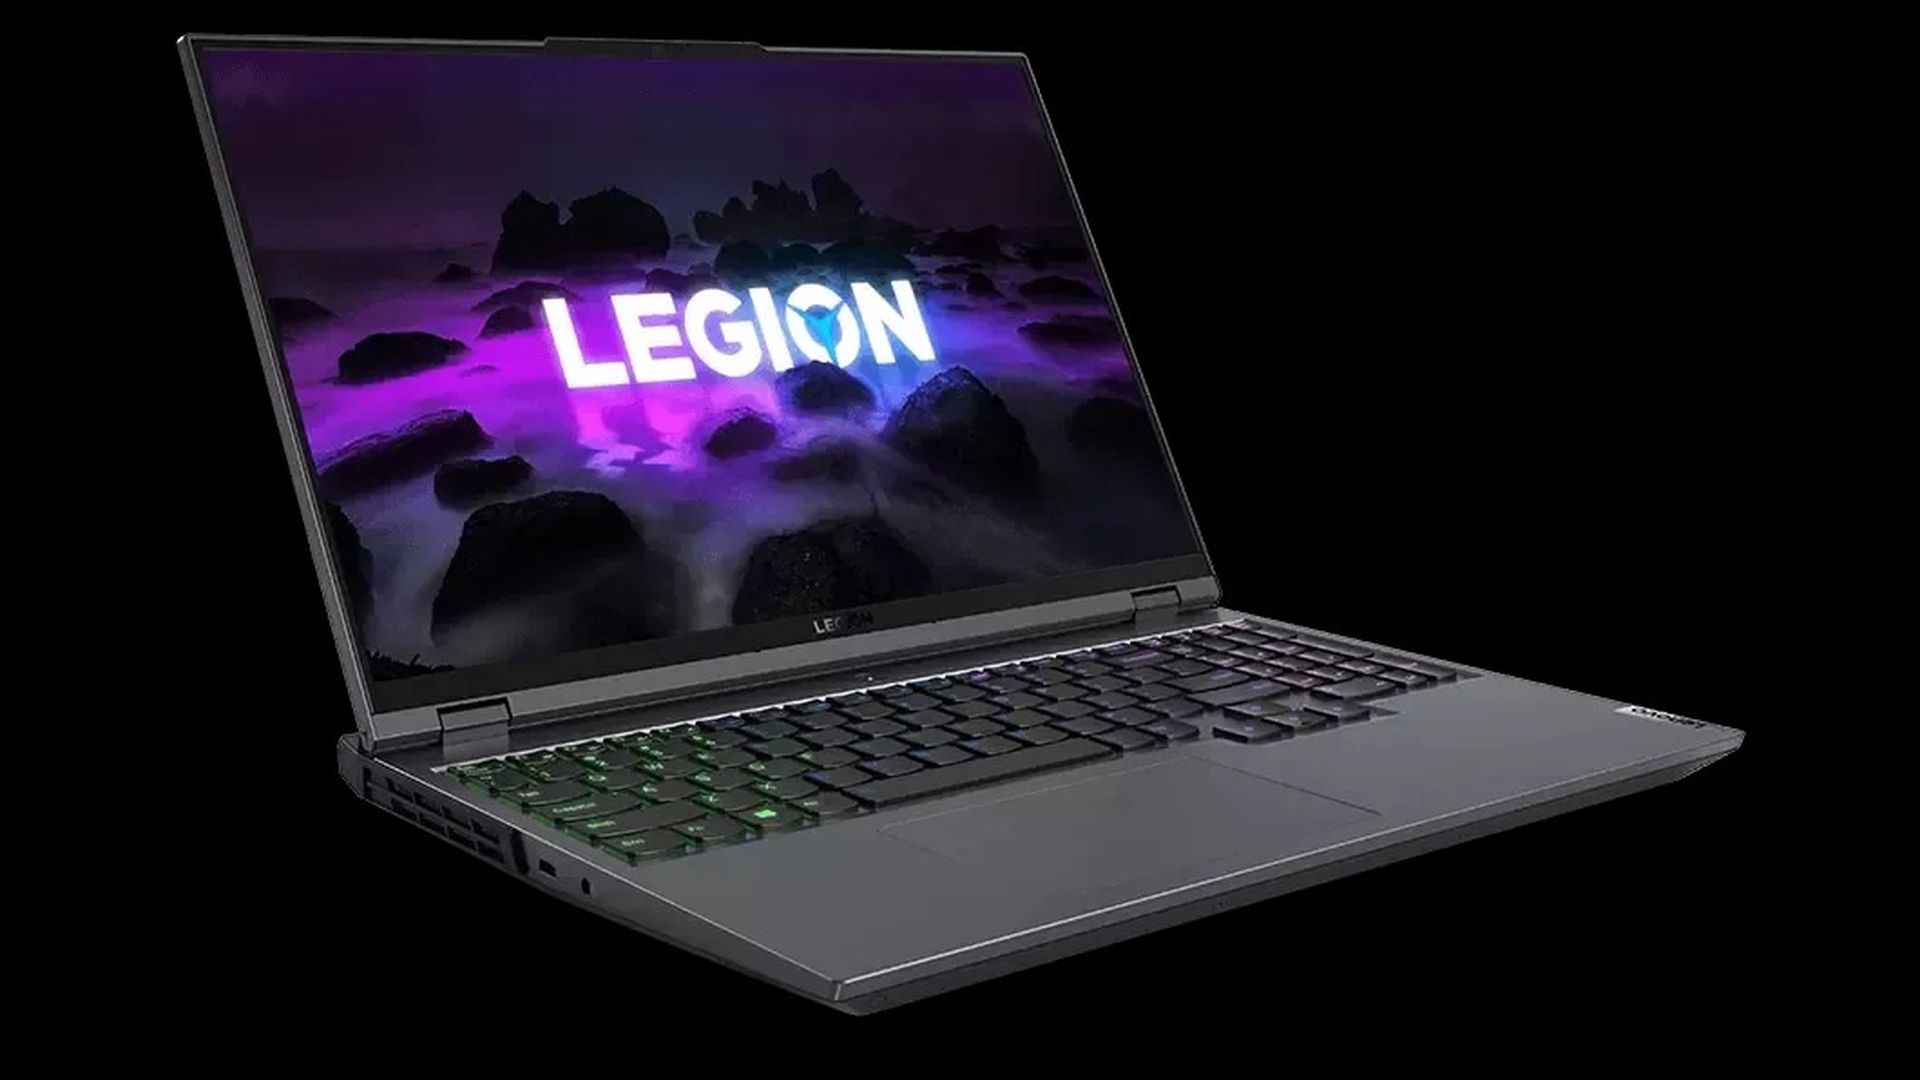 Today, we are going to take a look at the Lenovo Legion 5 Pro, its specs, price, and all there is to know about this gaming laptop when compared to its rivals.